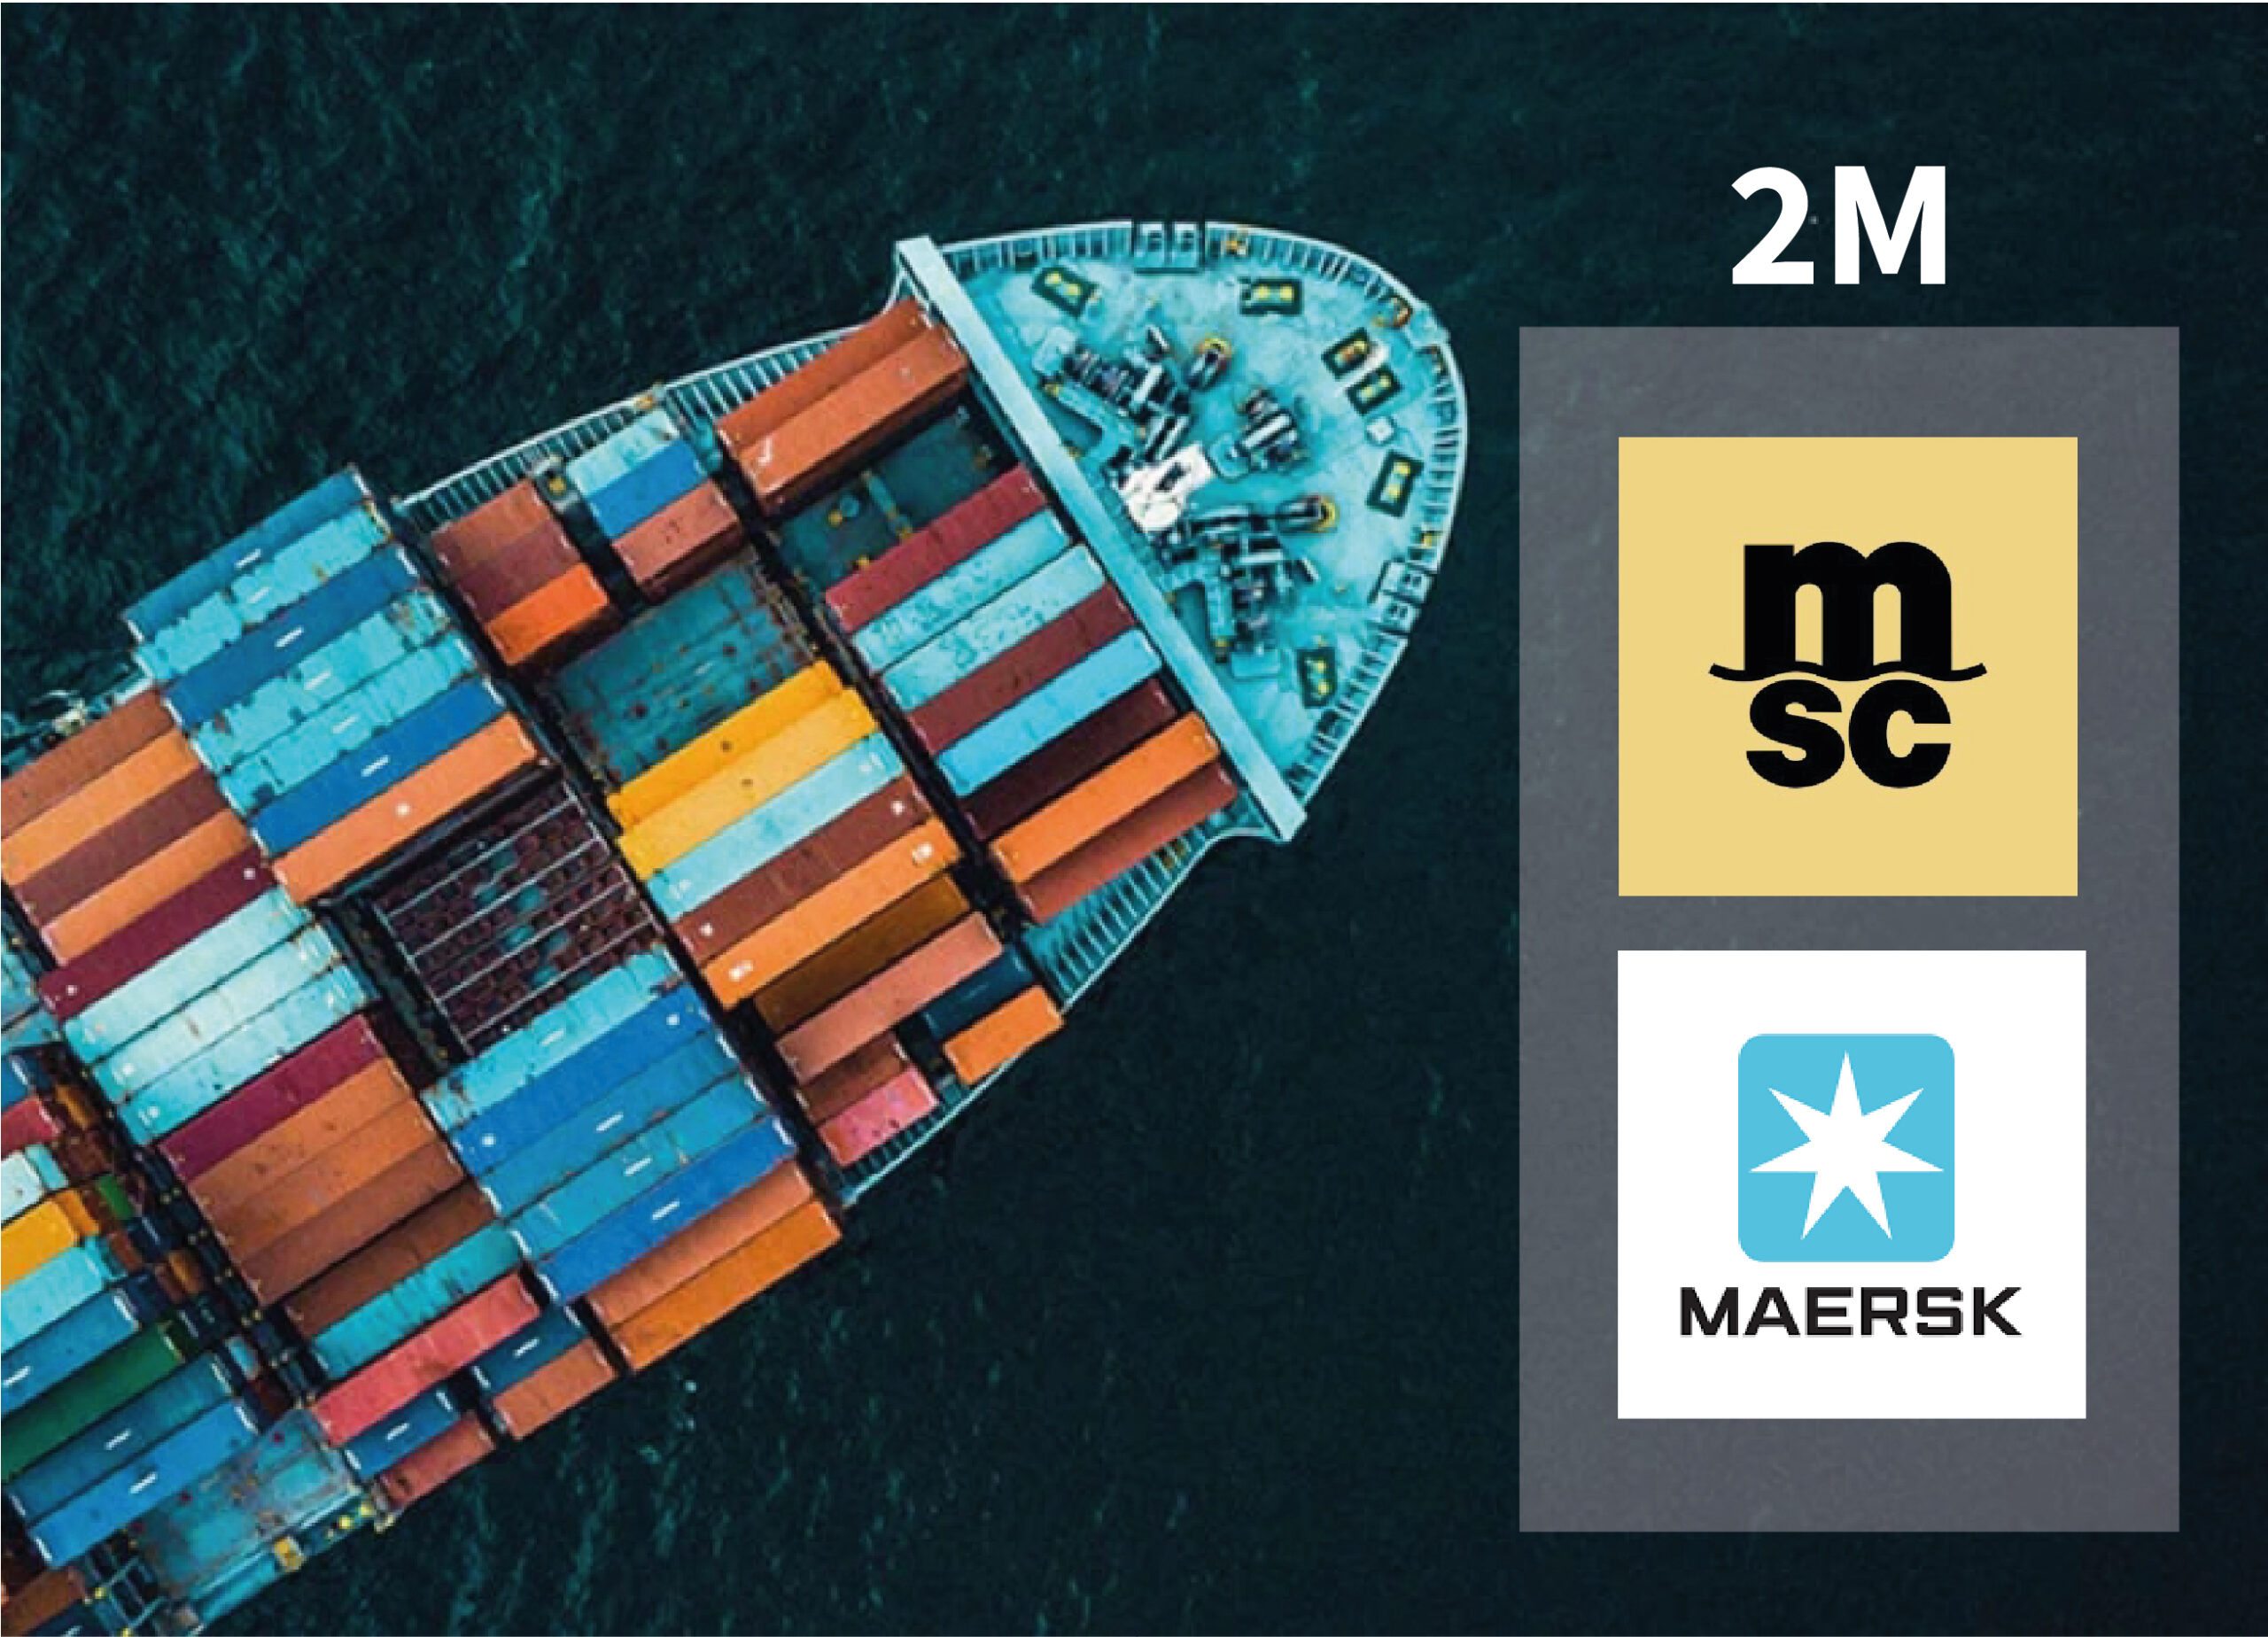 Maersk and MSC to discontinue 2M alliance in January 2025